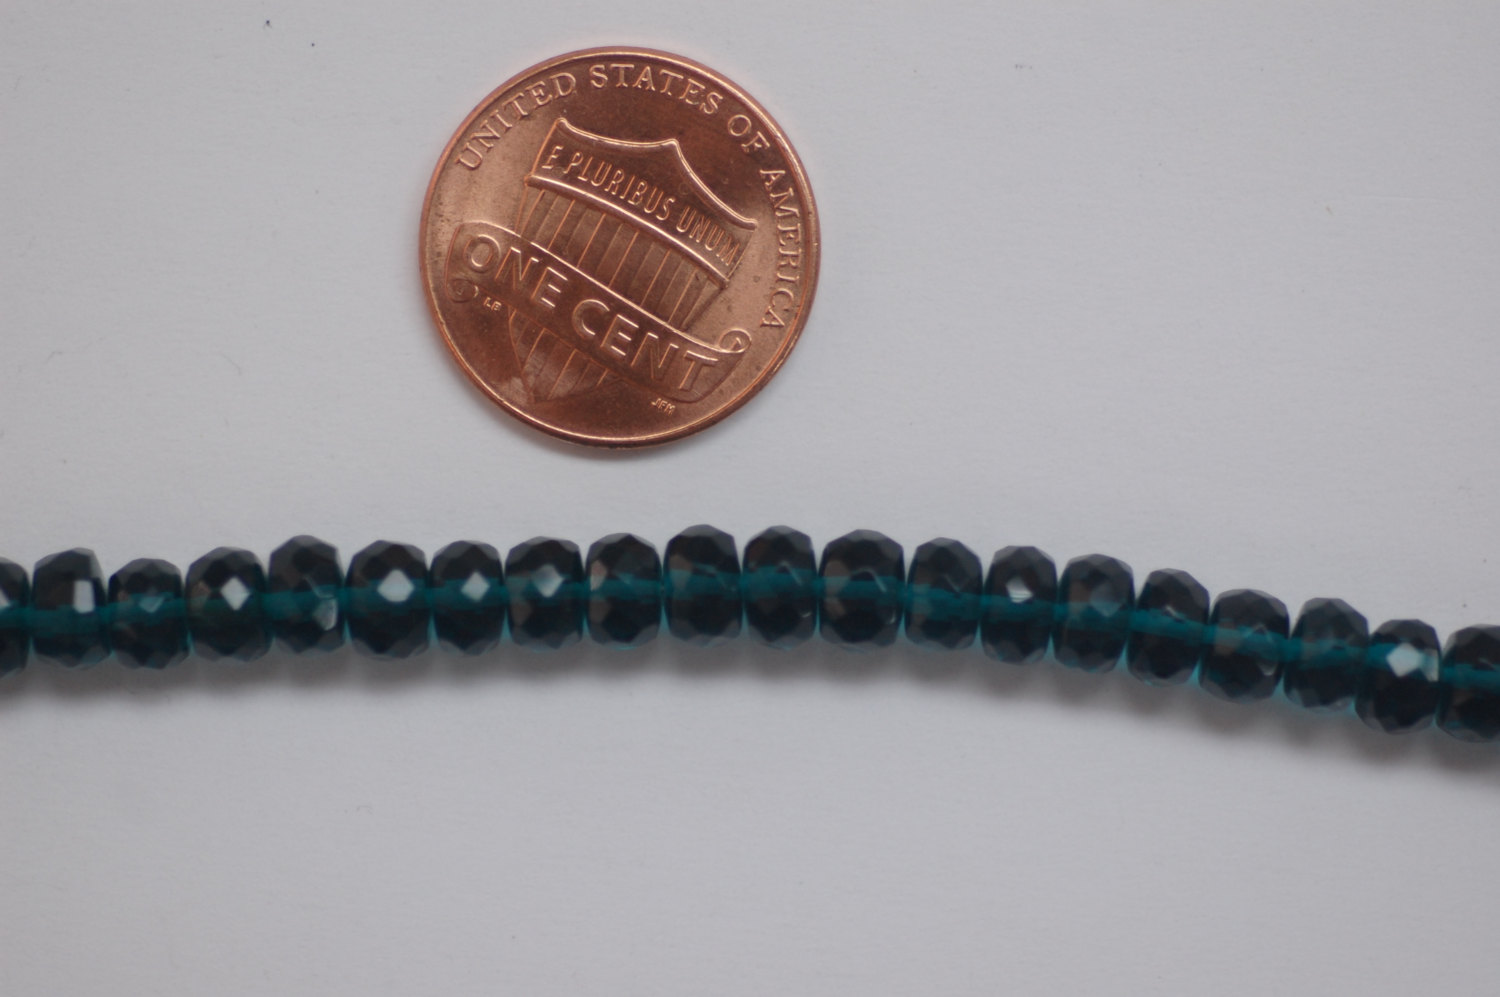 Hydro Teal Blue Rondelle Faceted